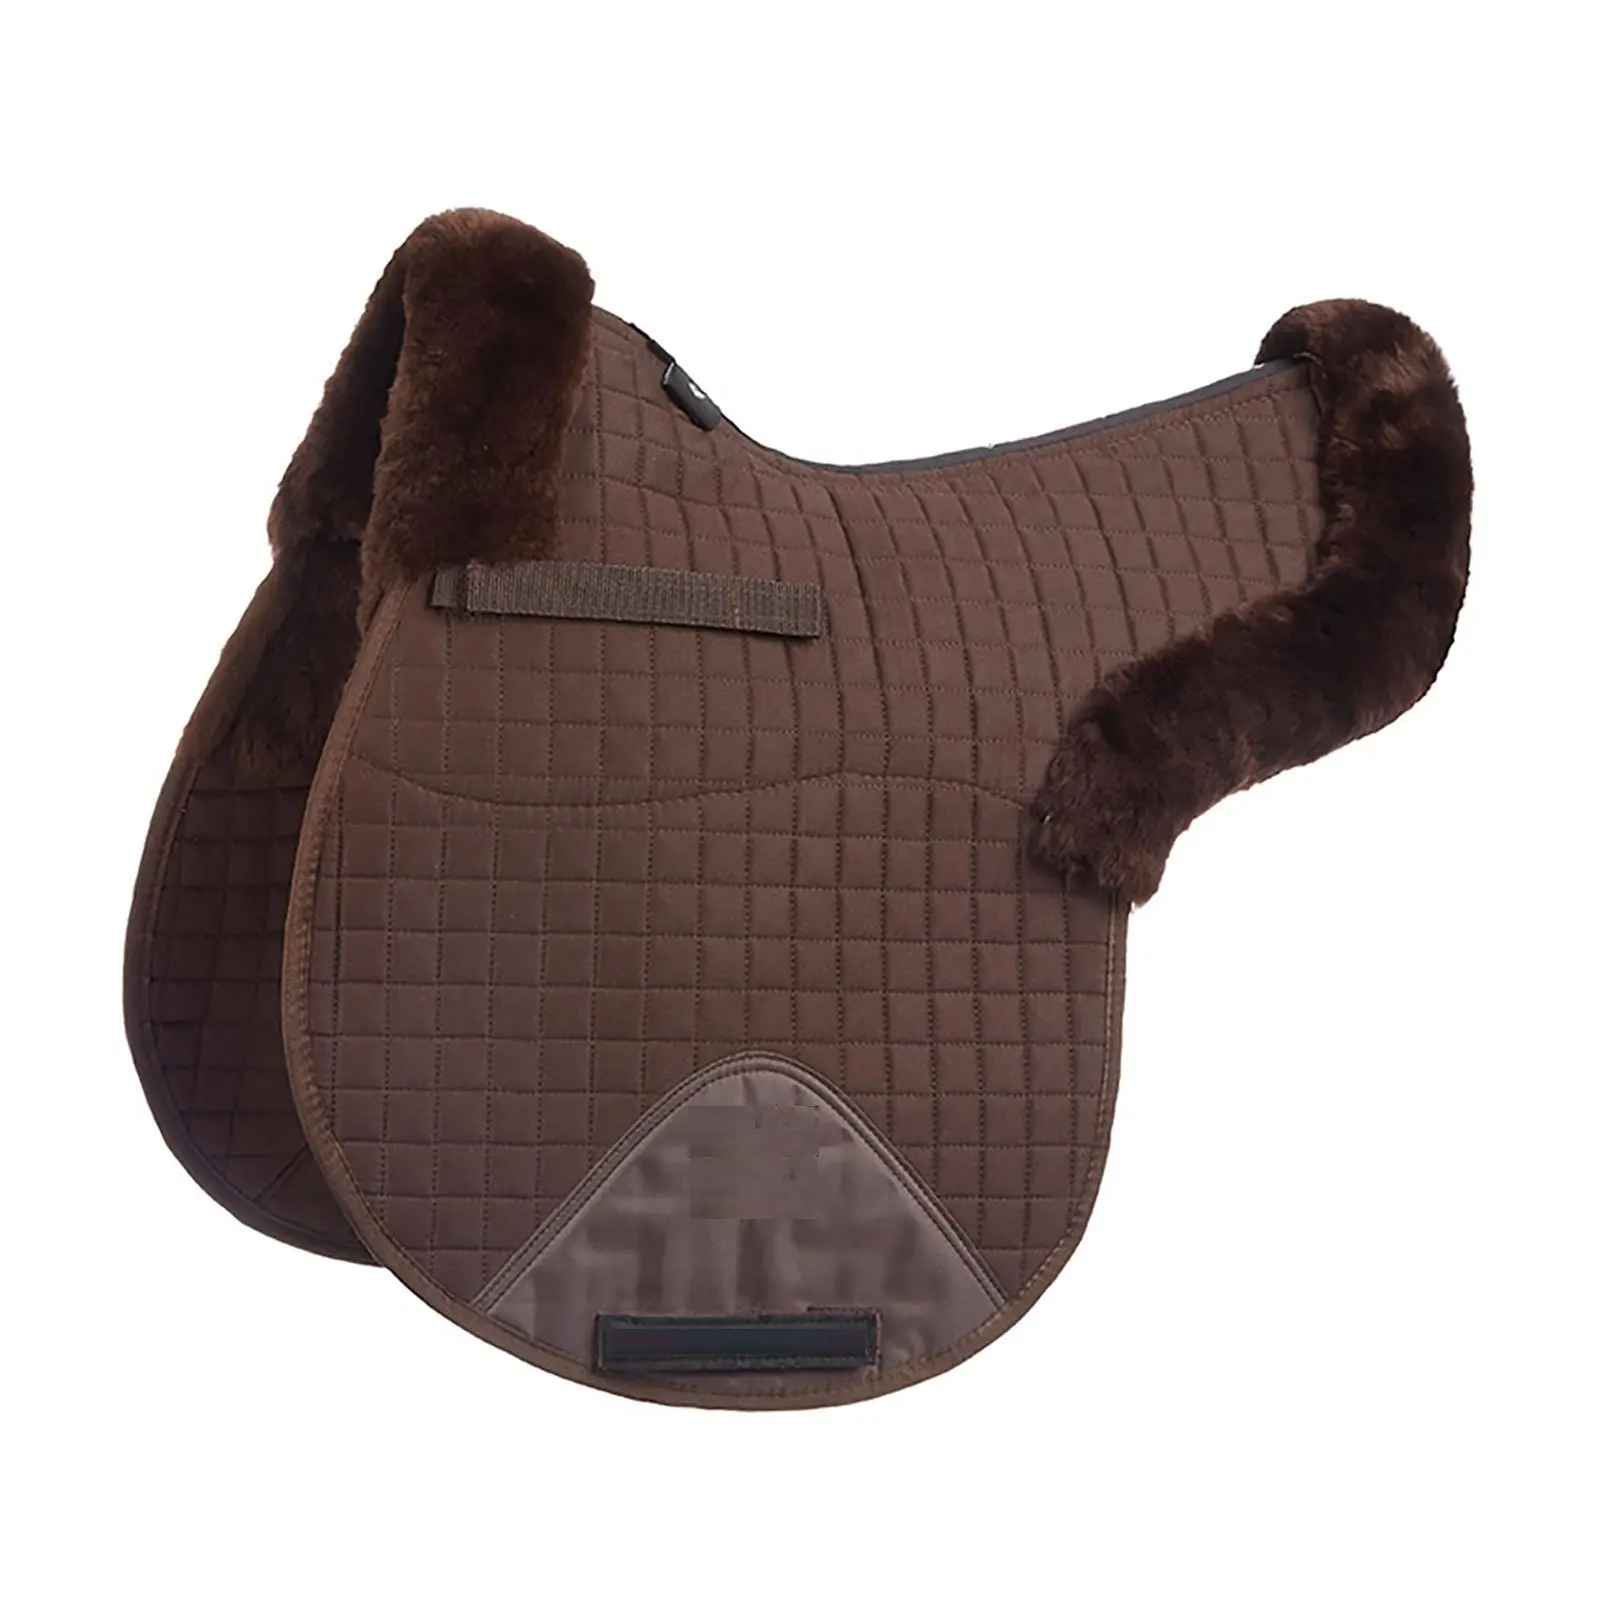 JOXAR HORSE RIDING EQUESTRIAN TOP QUALITY LAMBSWOOL NUMNAH SADDLE PAD